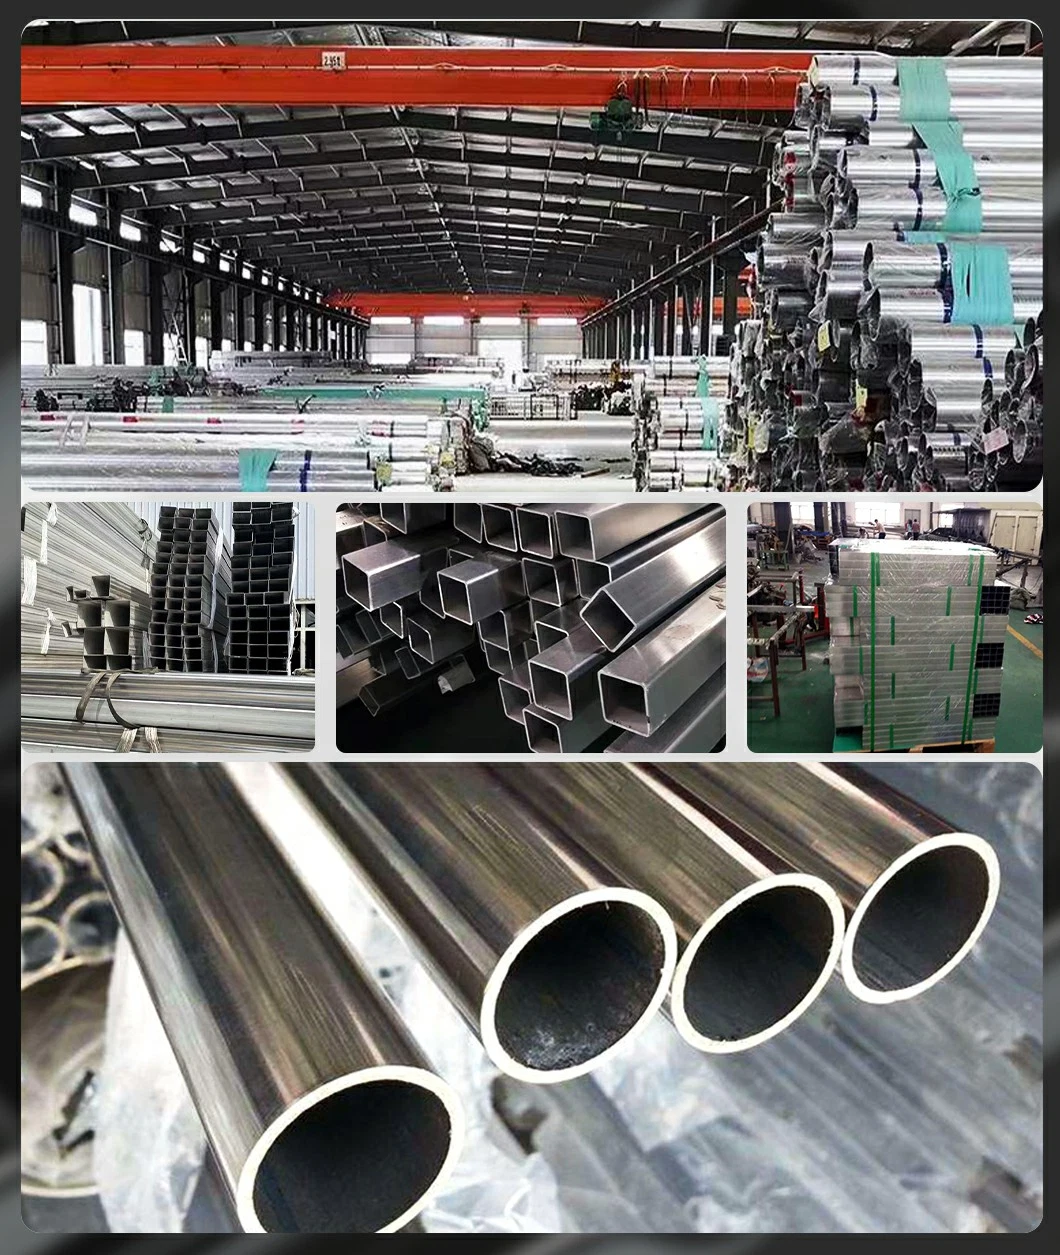 Ss Industry Stainless Steel Seamless/Welded Pipe AISI 304 Mirror Polished Stainless Steel Tubes Pipes /Stainless Steel Pipe with Round/Square